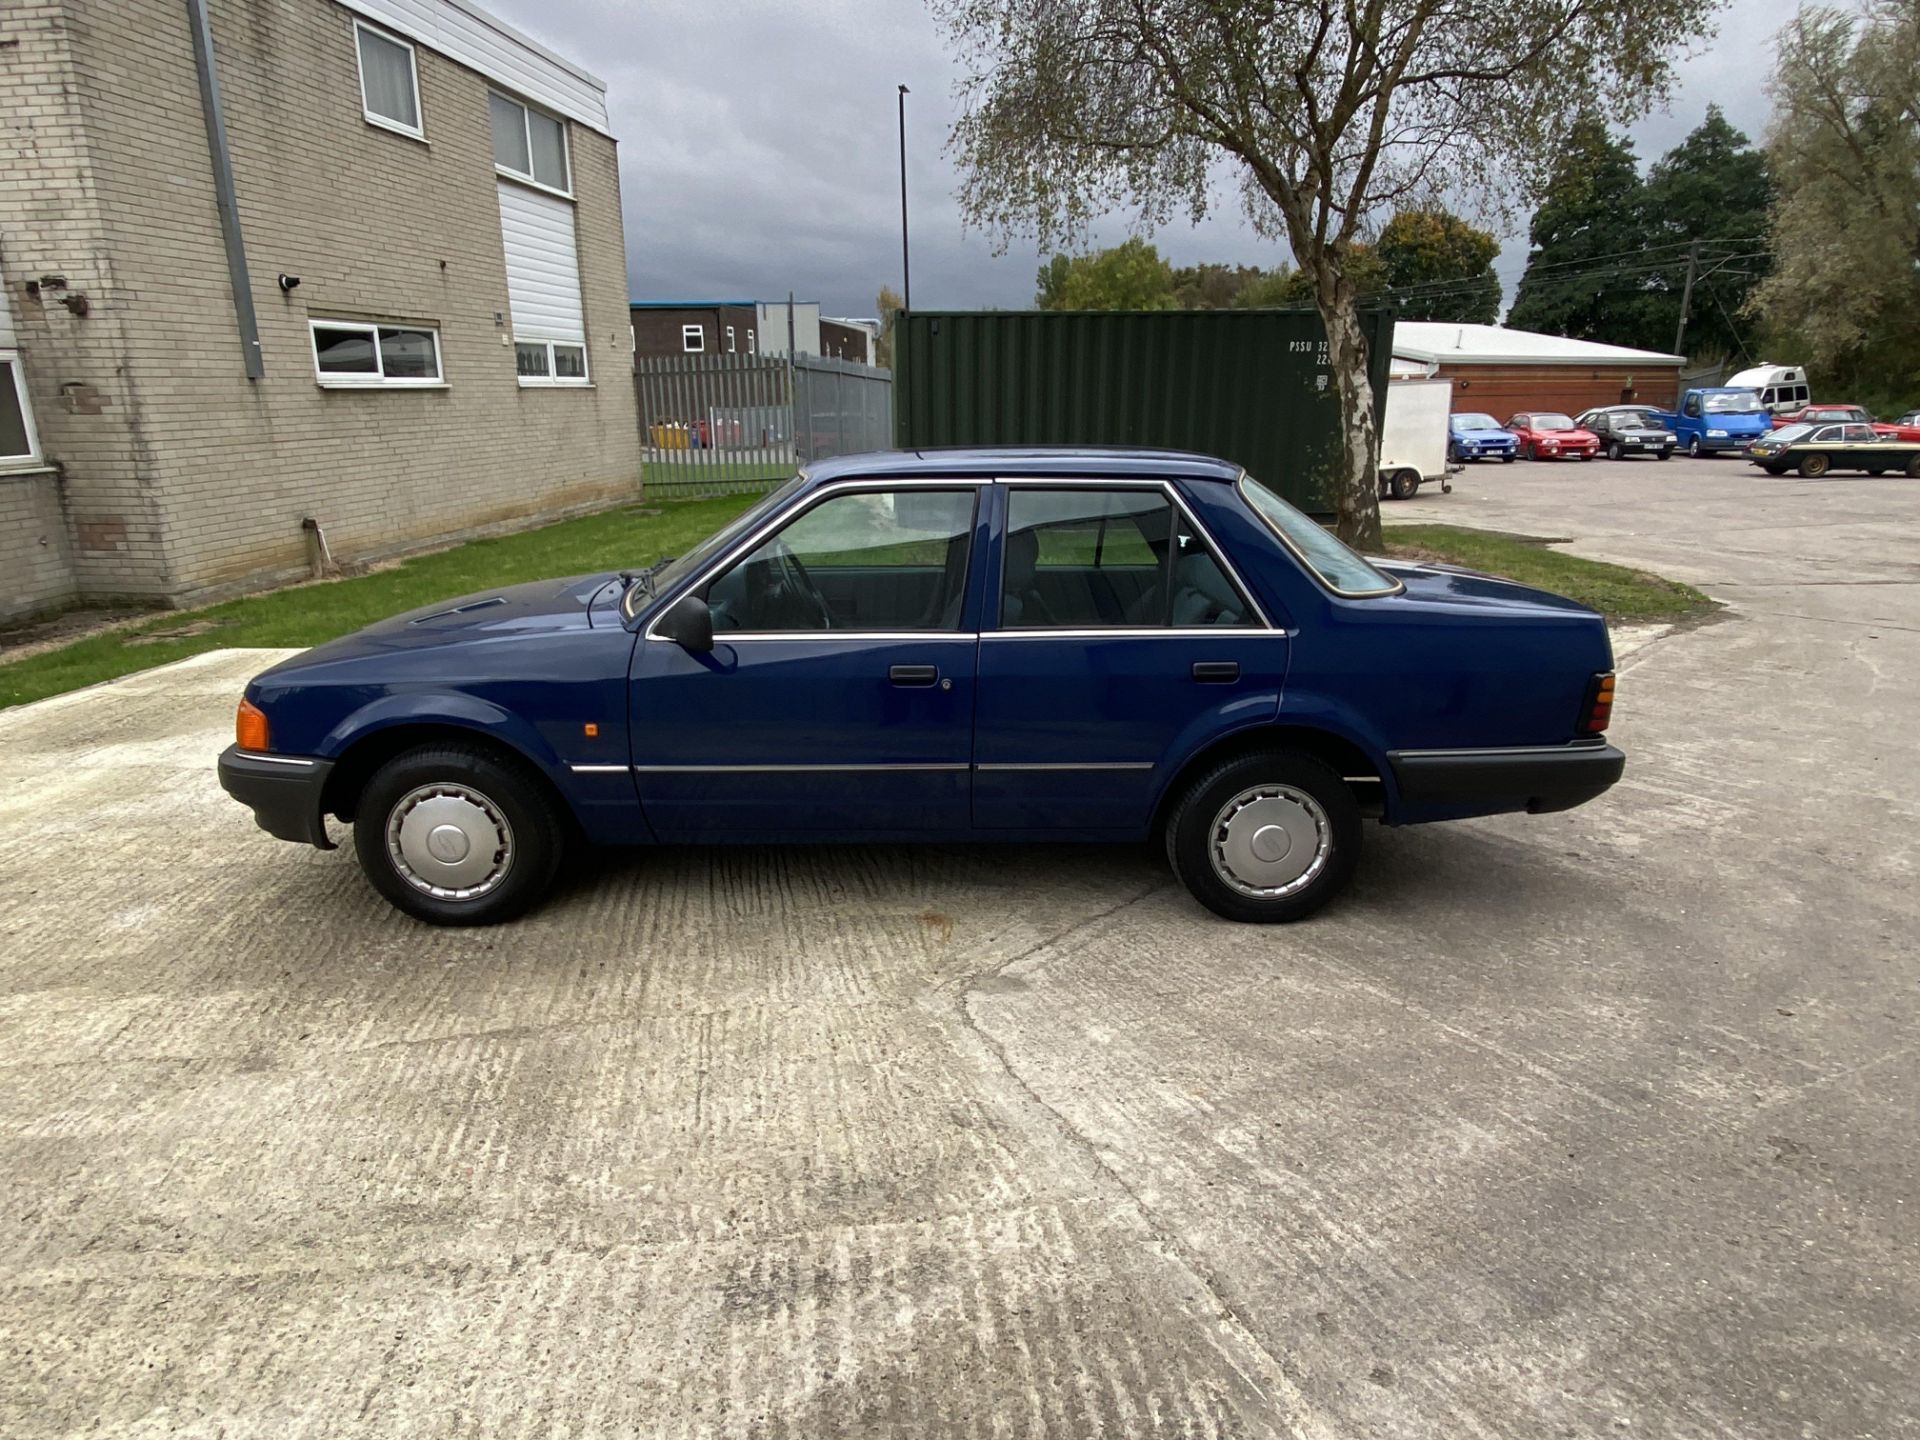 Ford Orion 1.6 GL - Image 7 of 42